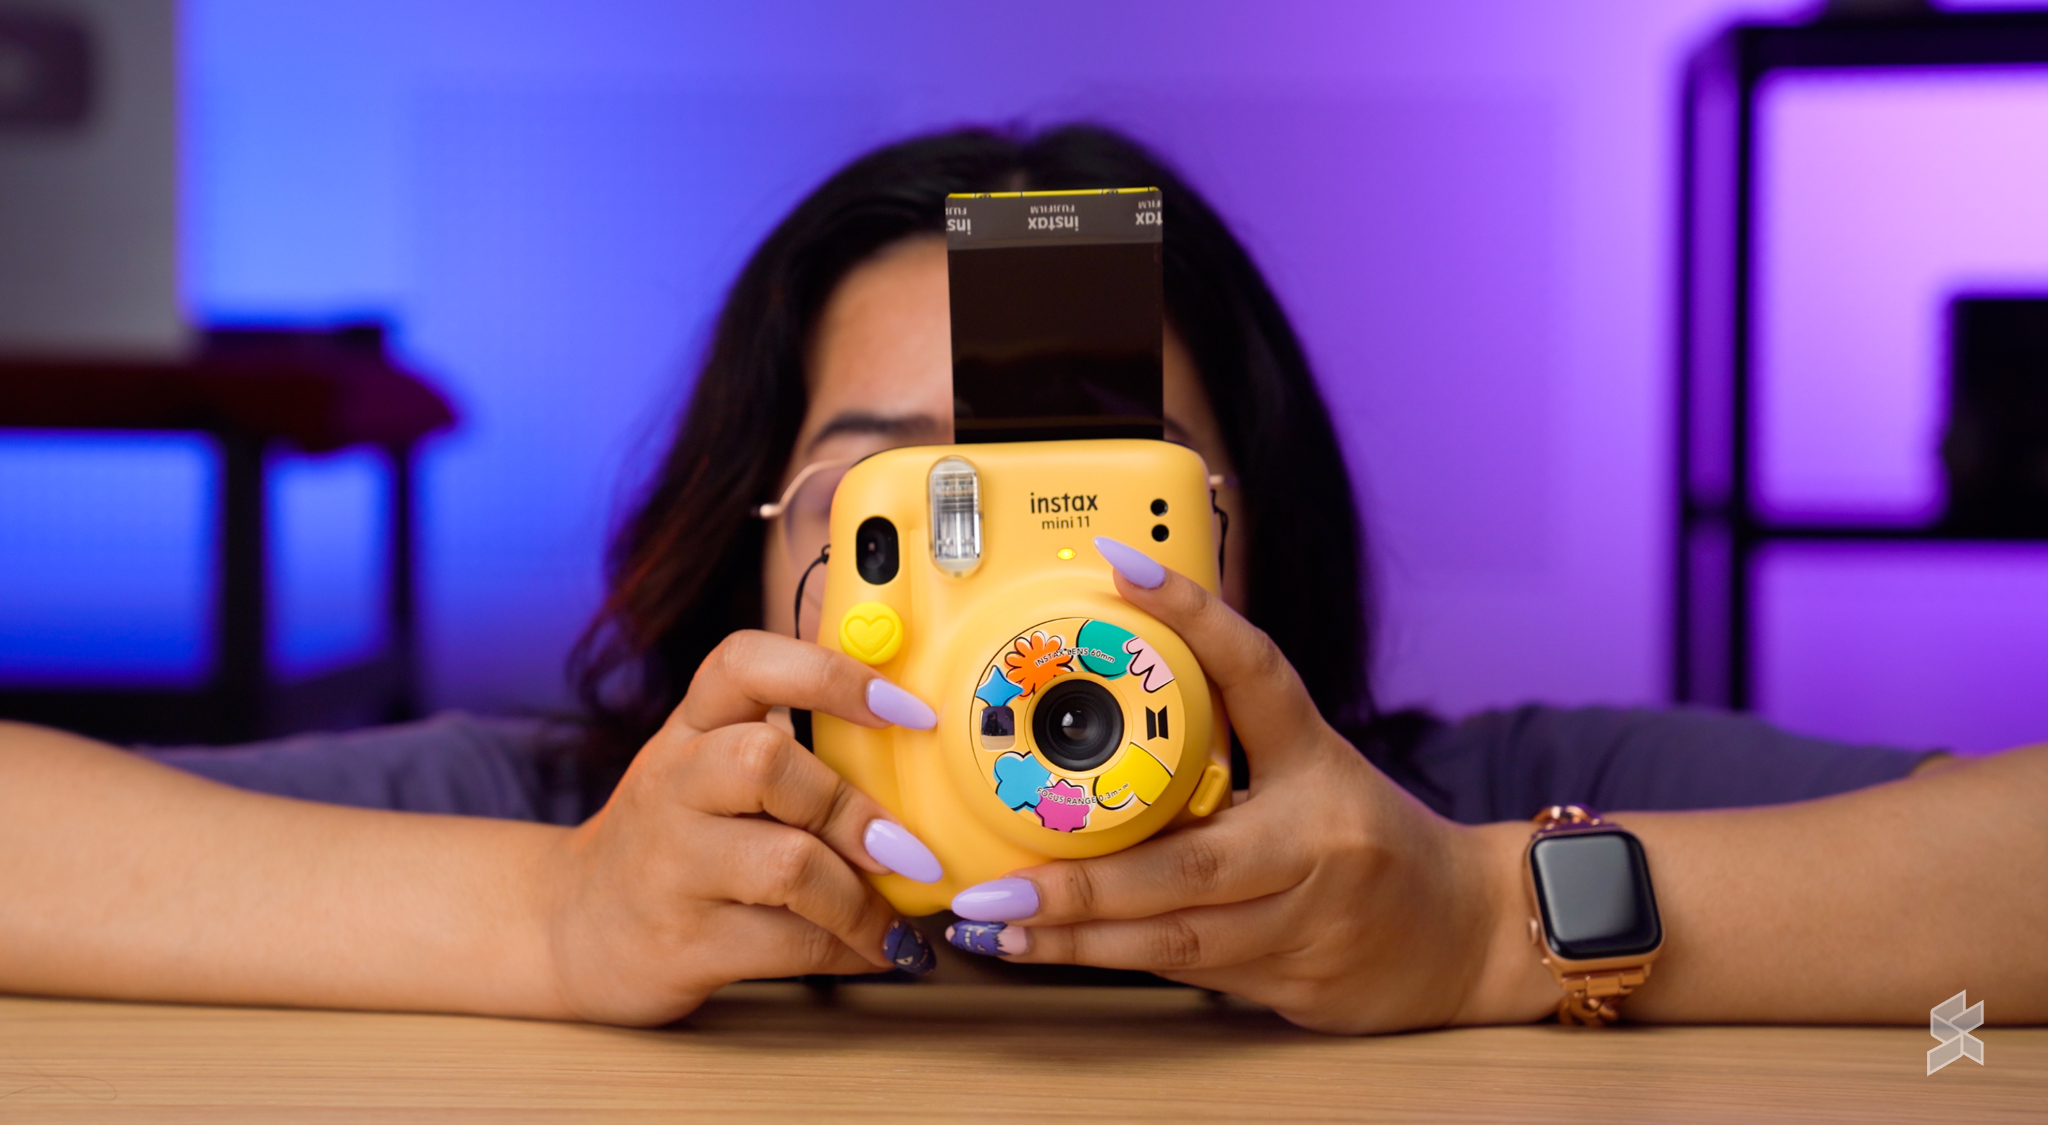 BTS Butter Instax mini 11: Here's why you'd still want one, in this day and  age - SoyaCincau, instax mini 11 